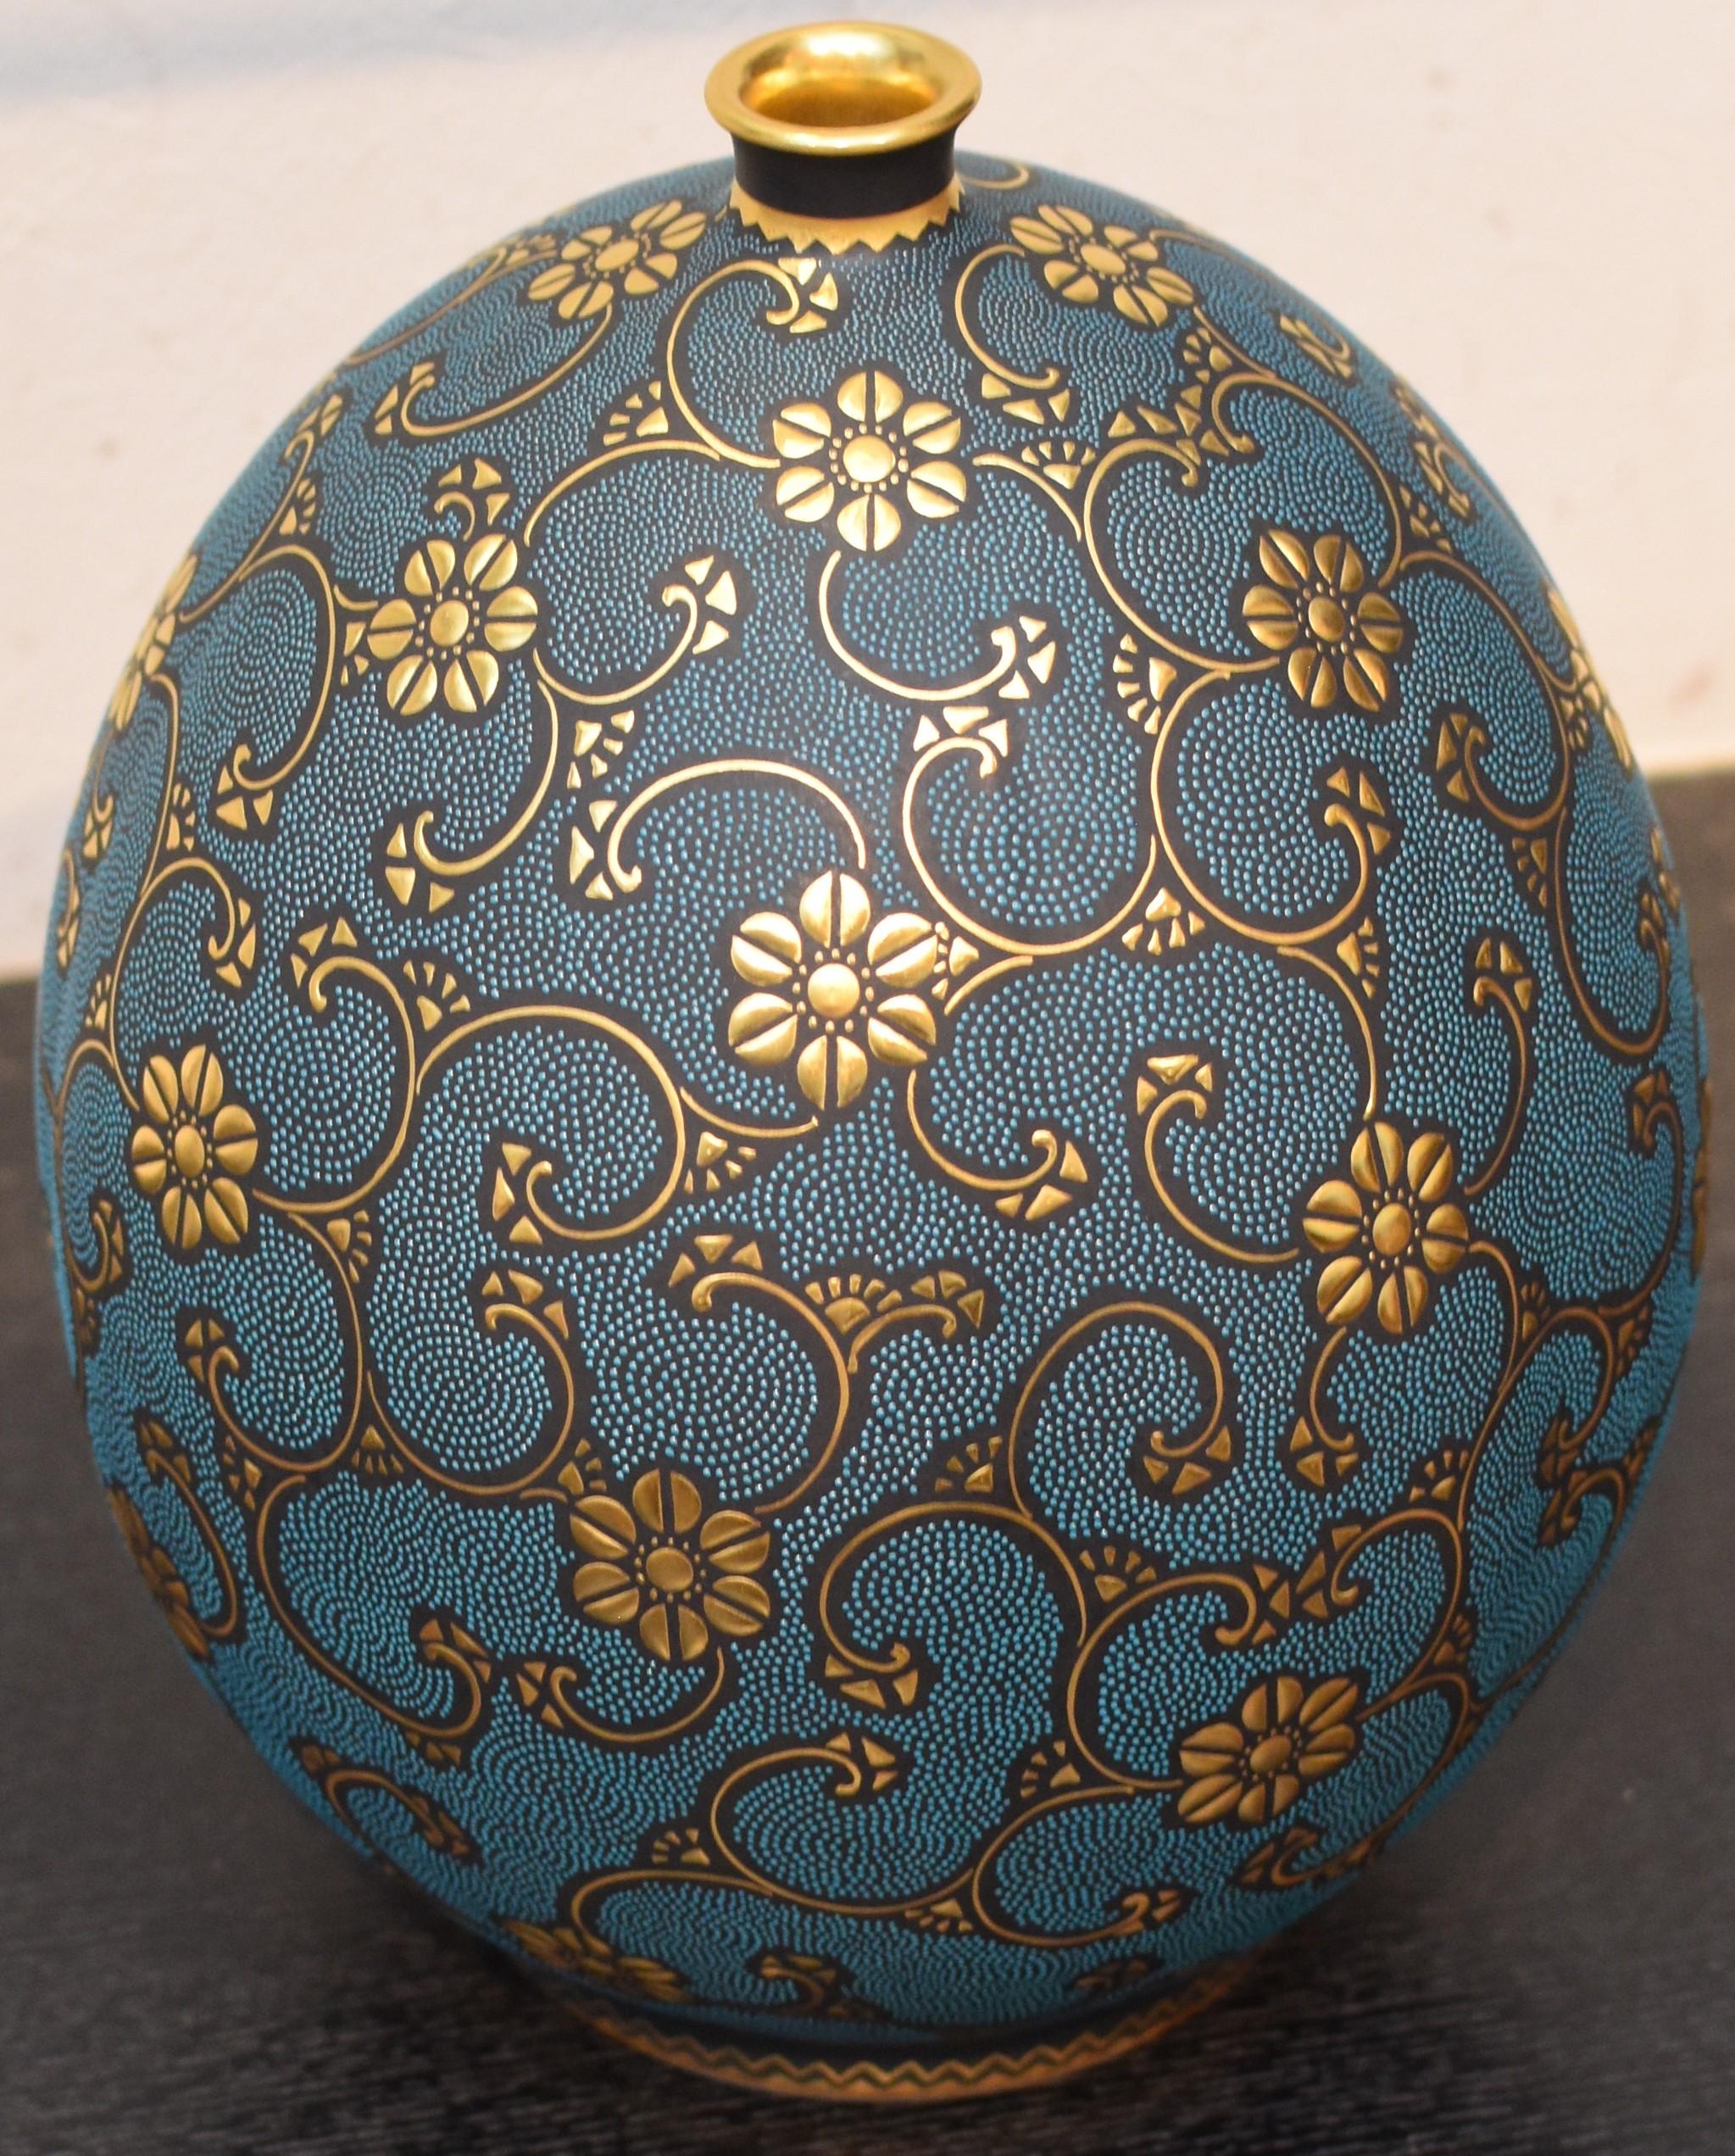 Hand-Painted Contemporary Blue Pure Gold Porcelain Vase by Japanese Master Artist